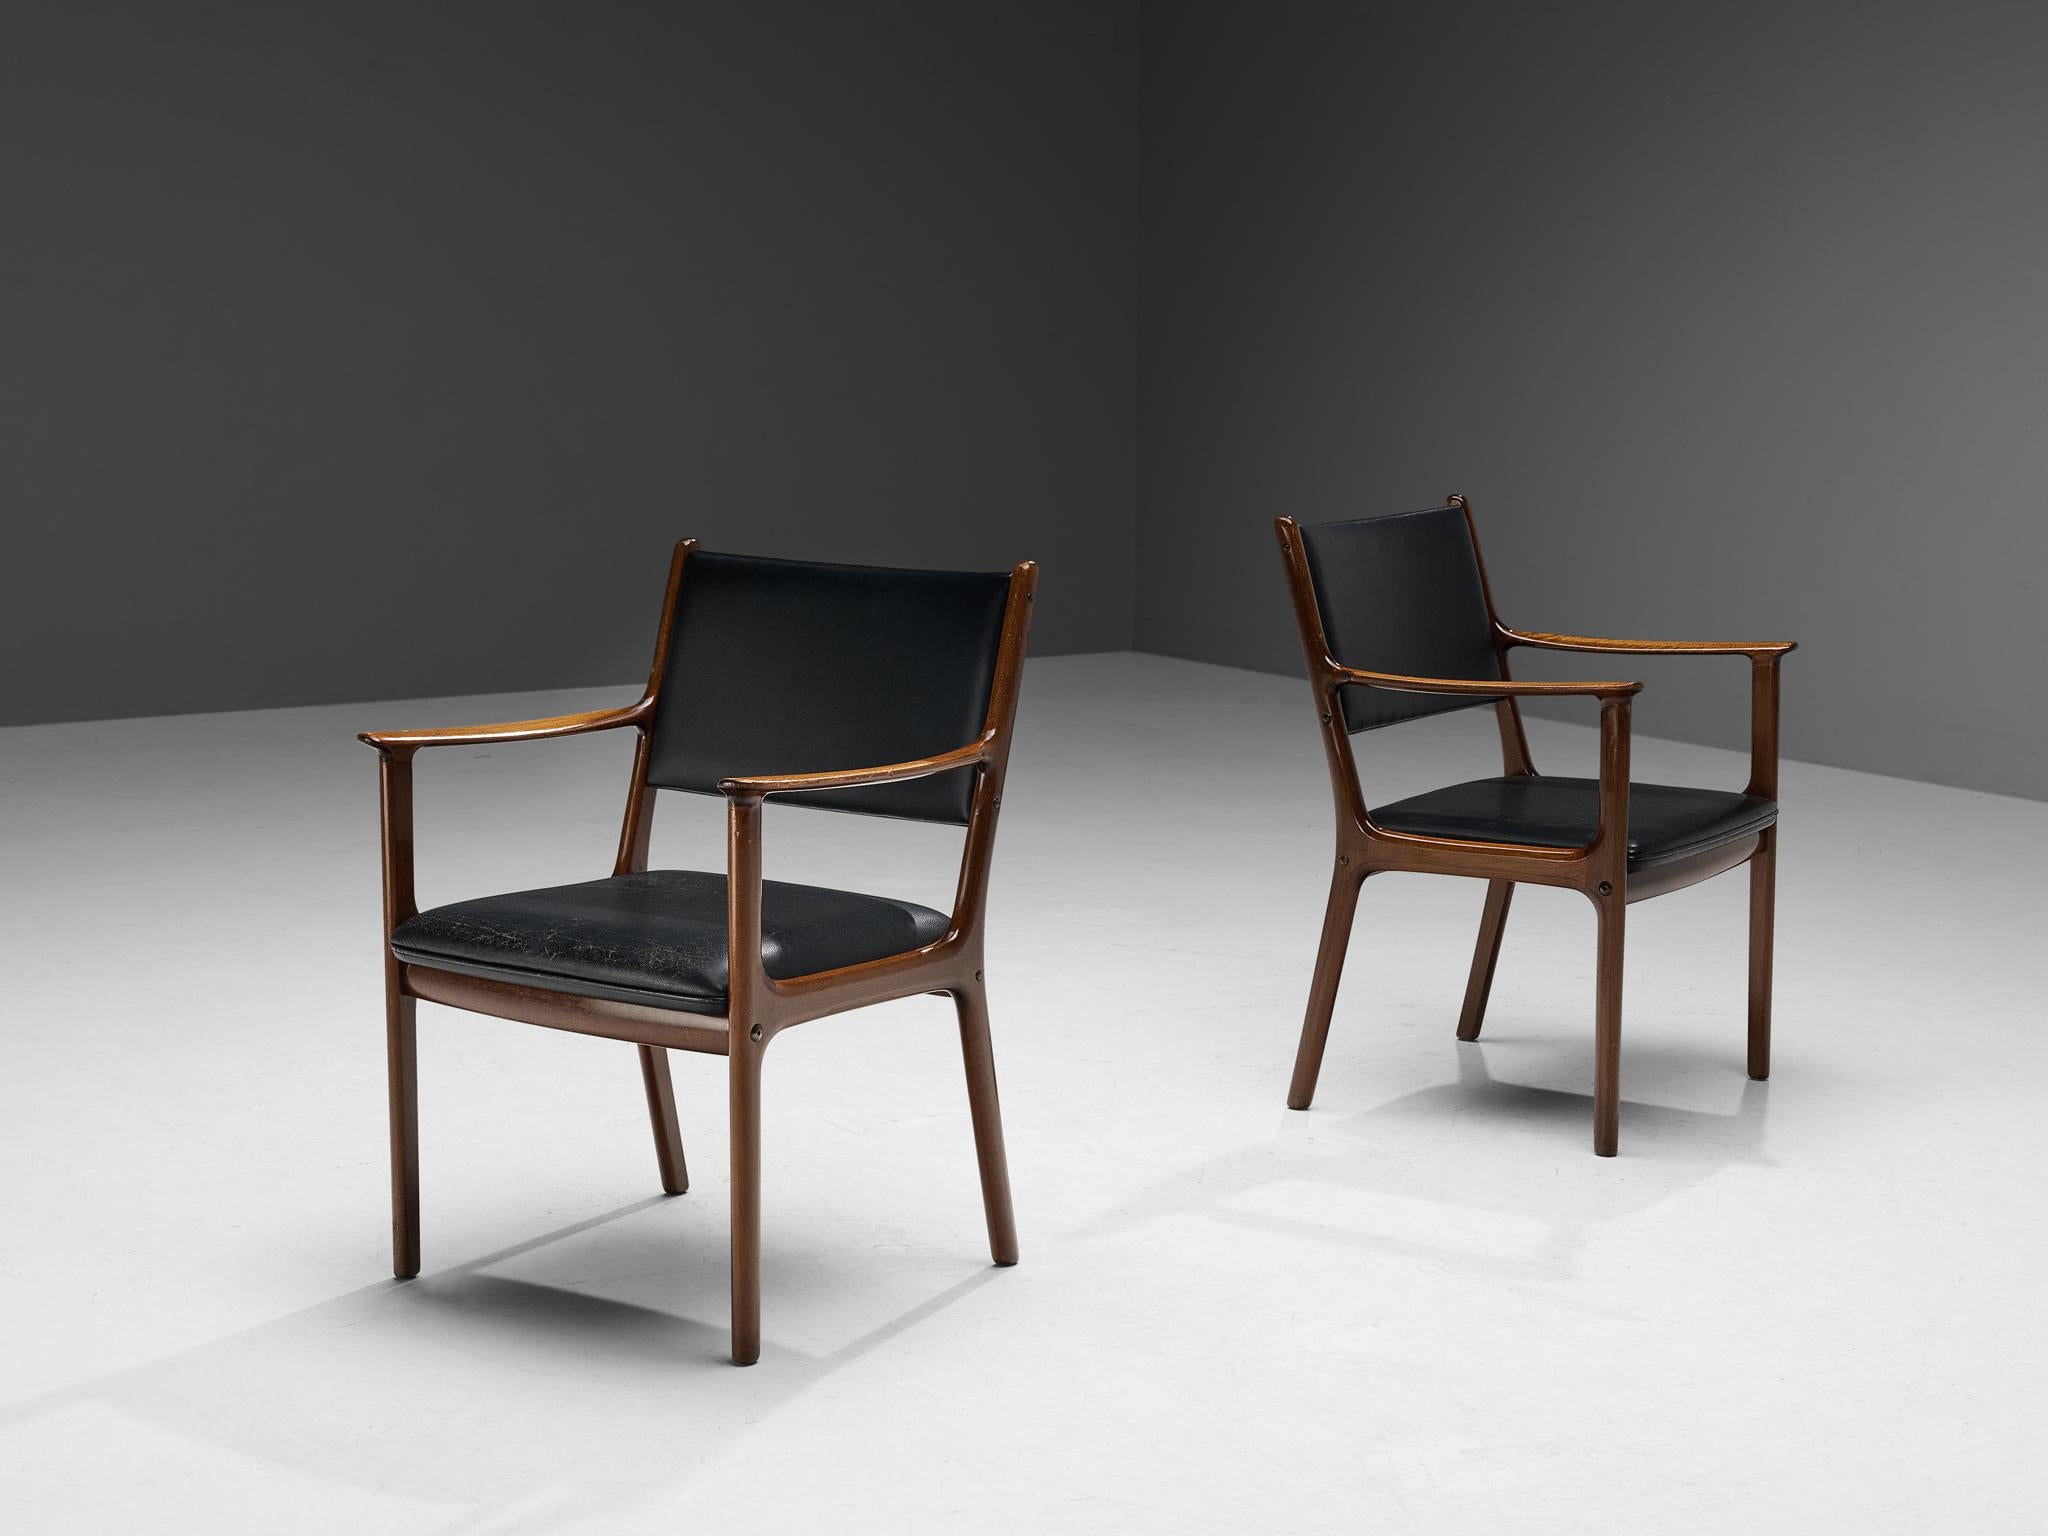 Scandinavian Modern Ole Wanscher for Poul Jeppesen Set of Four Armchairs in Teak and Black Leather